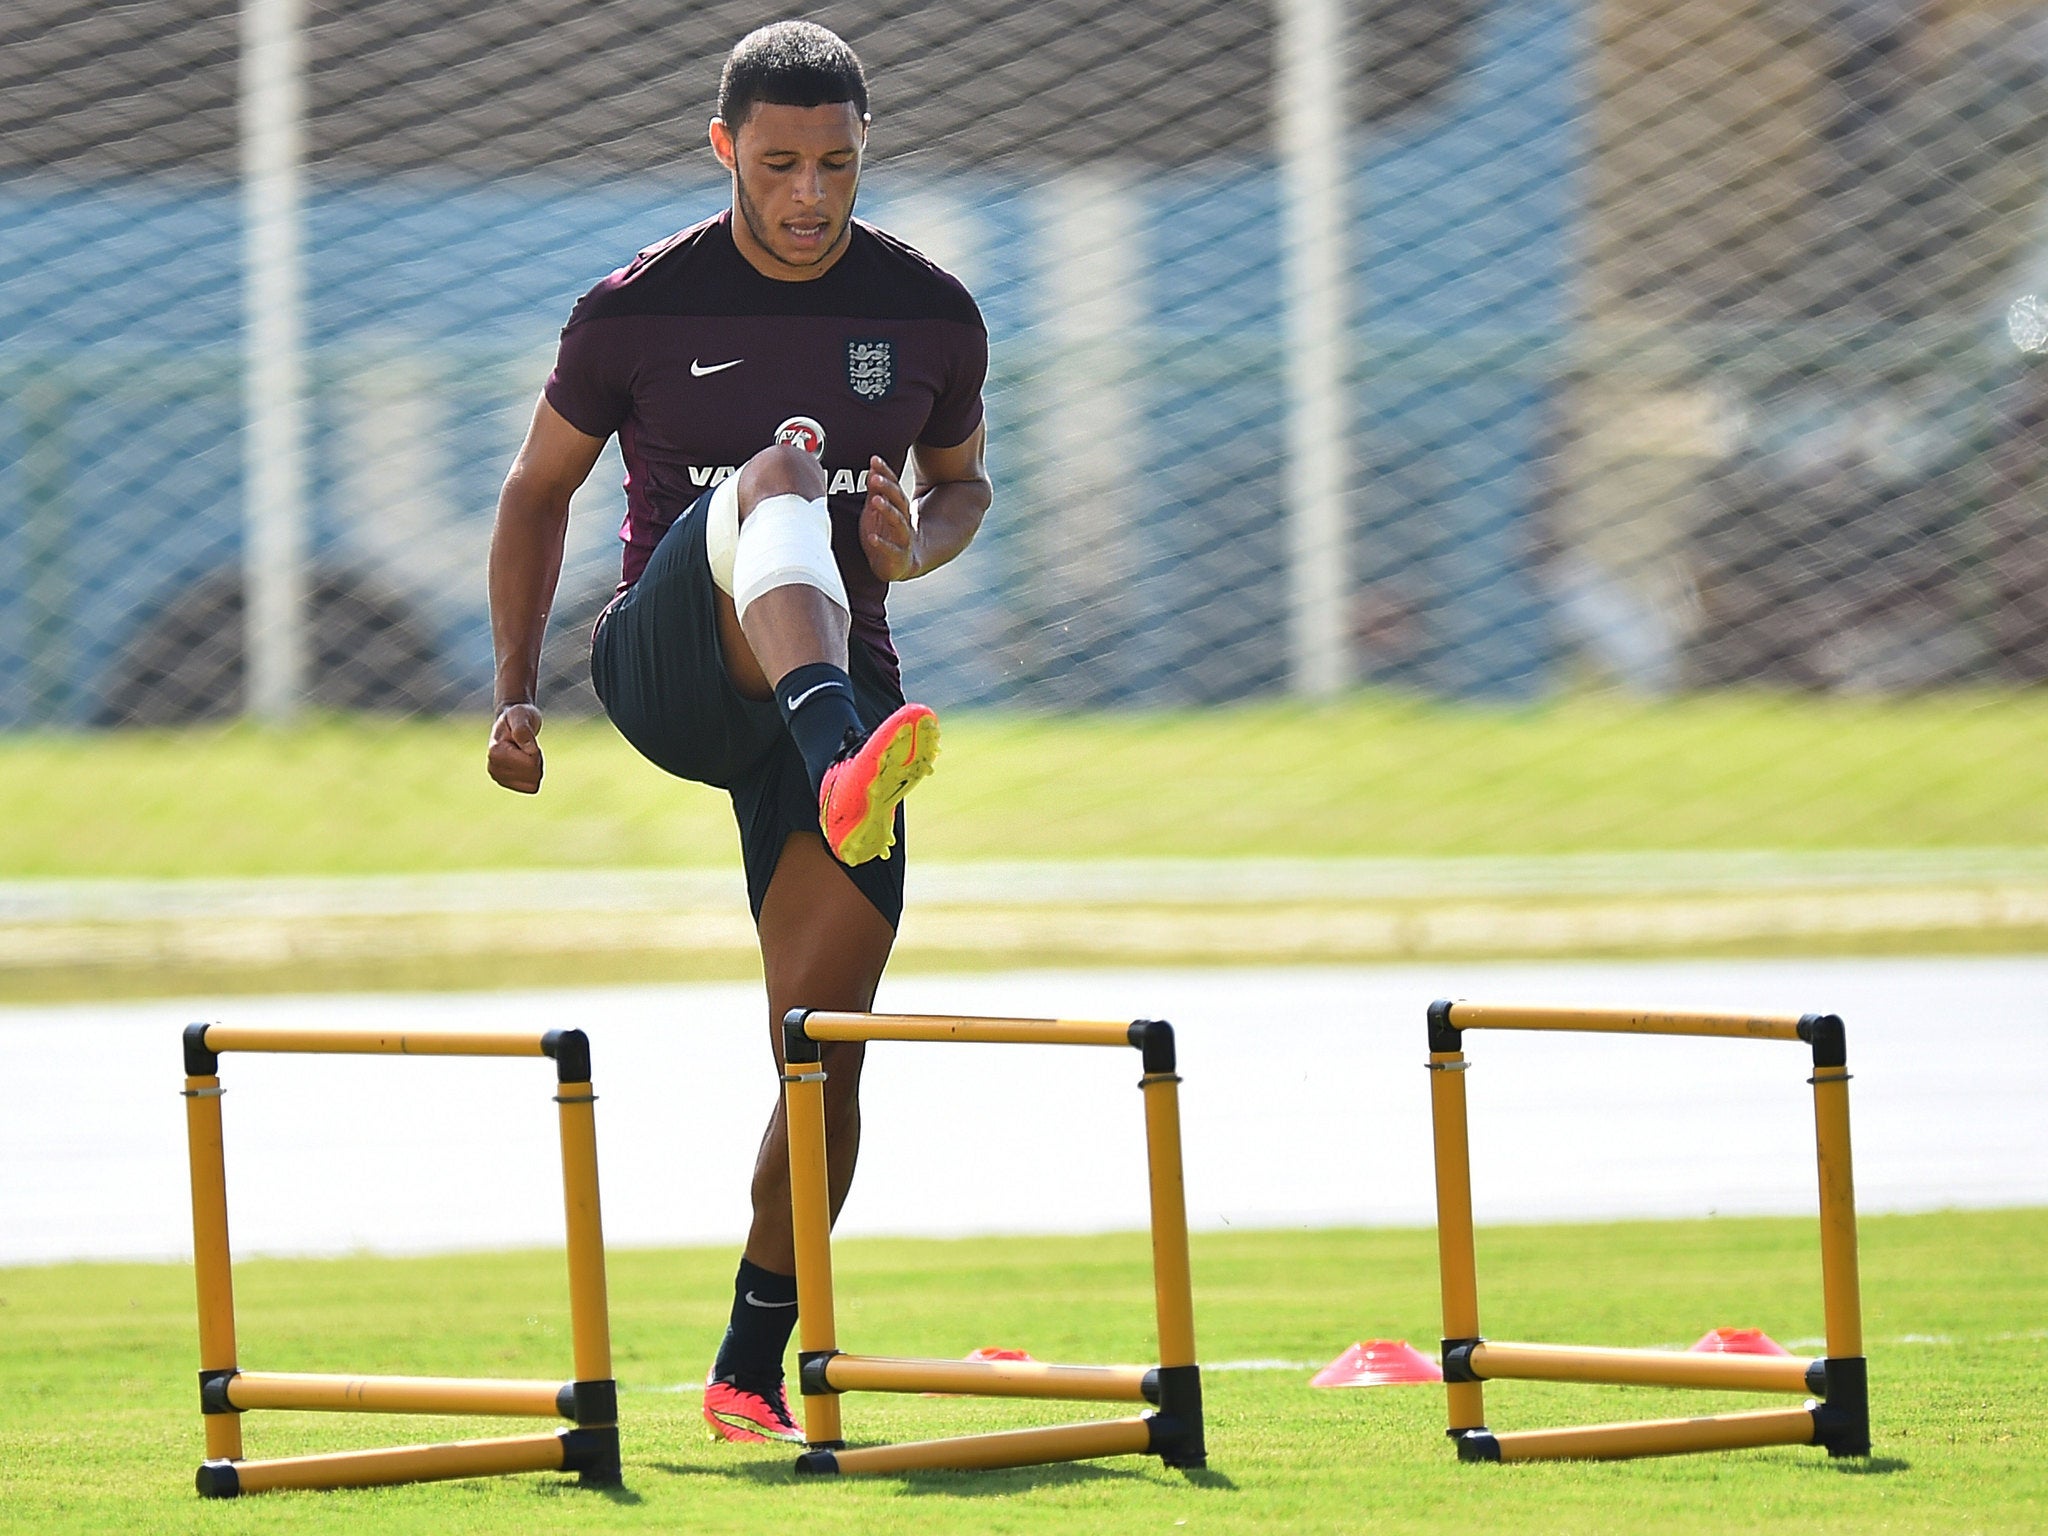 England's midfielder Alex Oxlade-Chamberlain takes part in a training session at the Urca military base in Rio de Janeiro on June 16, 2014.